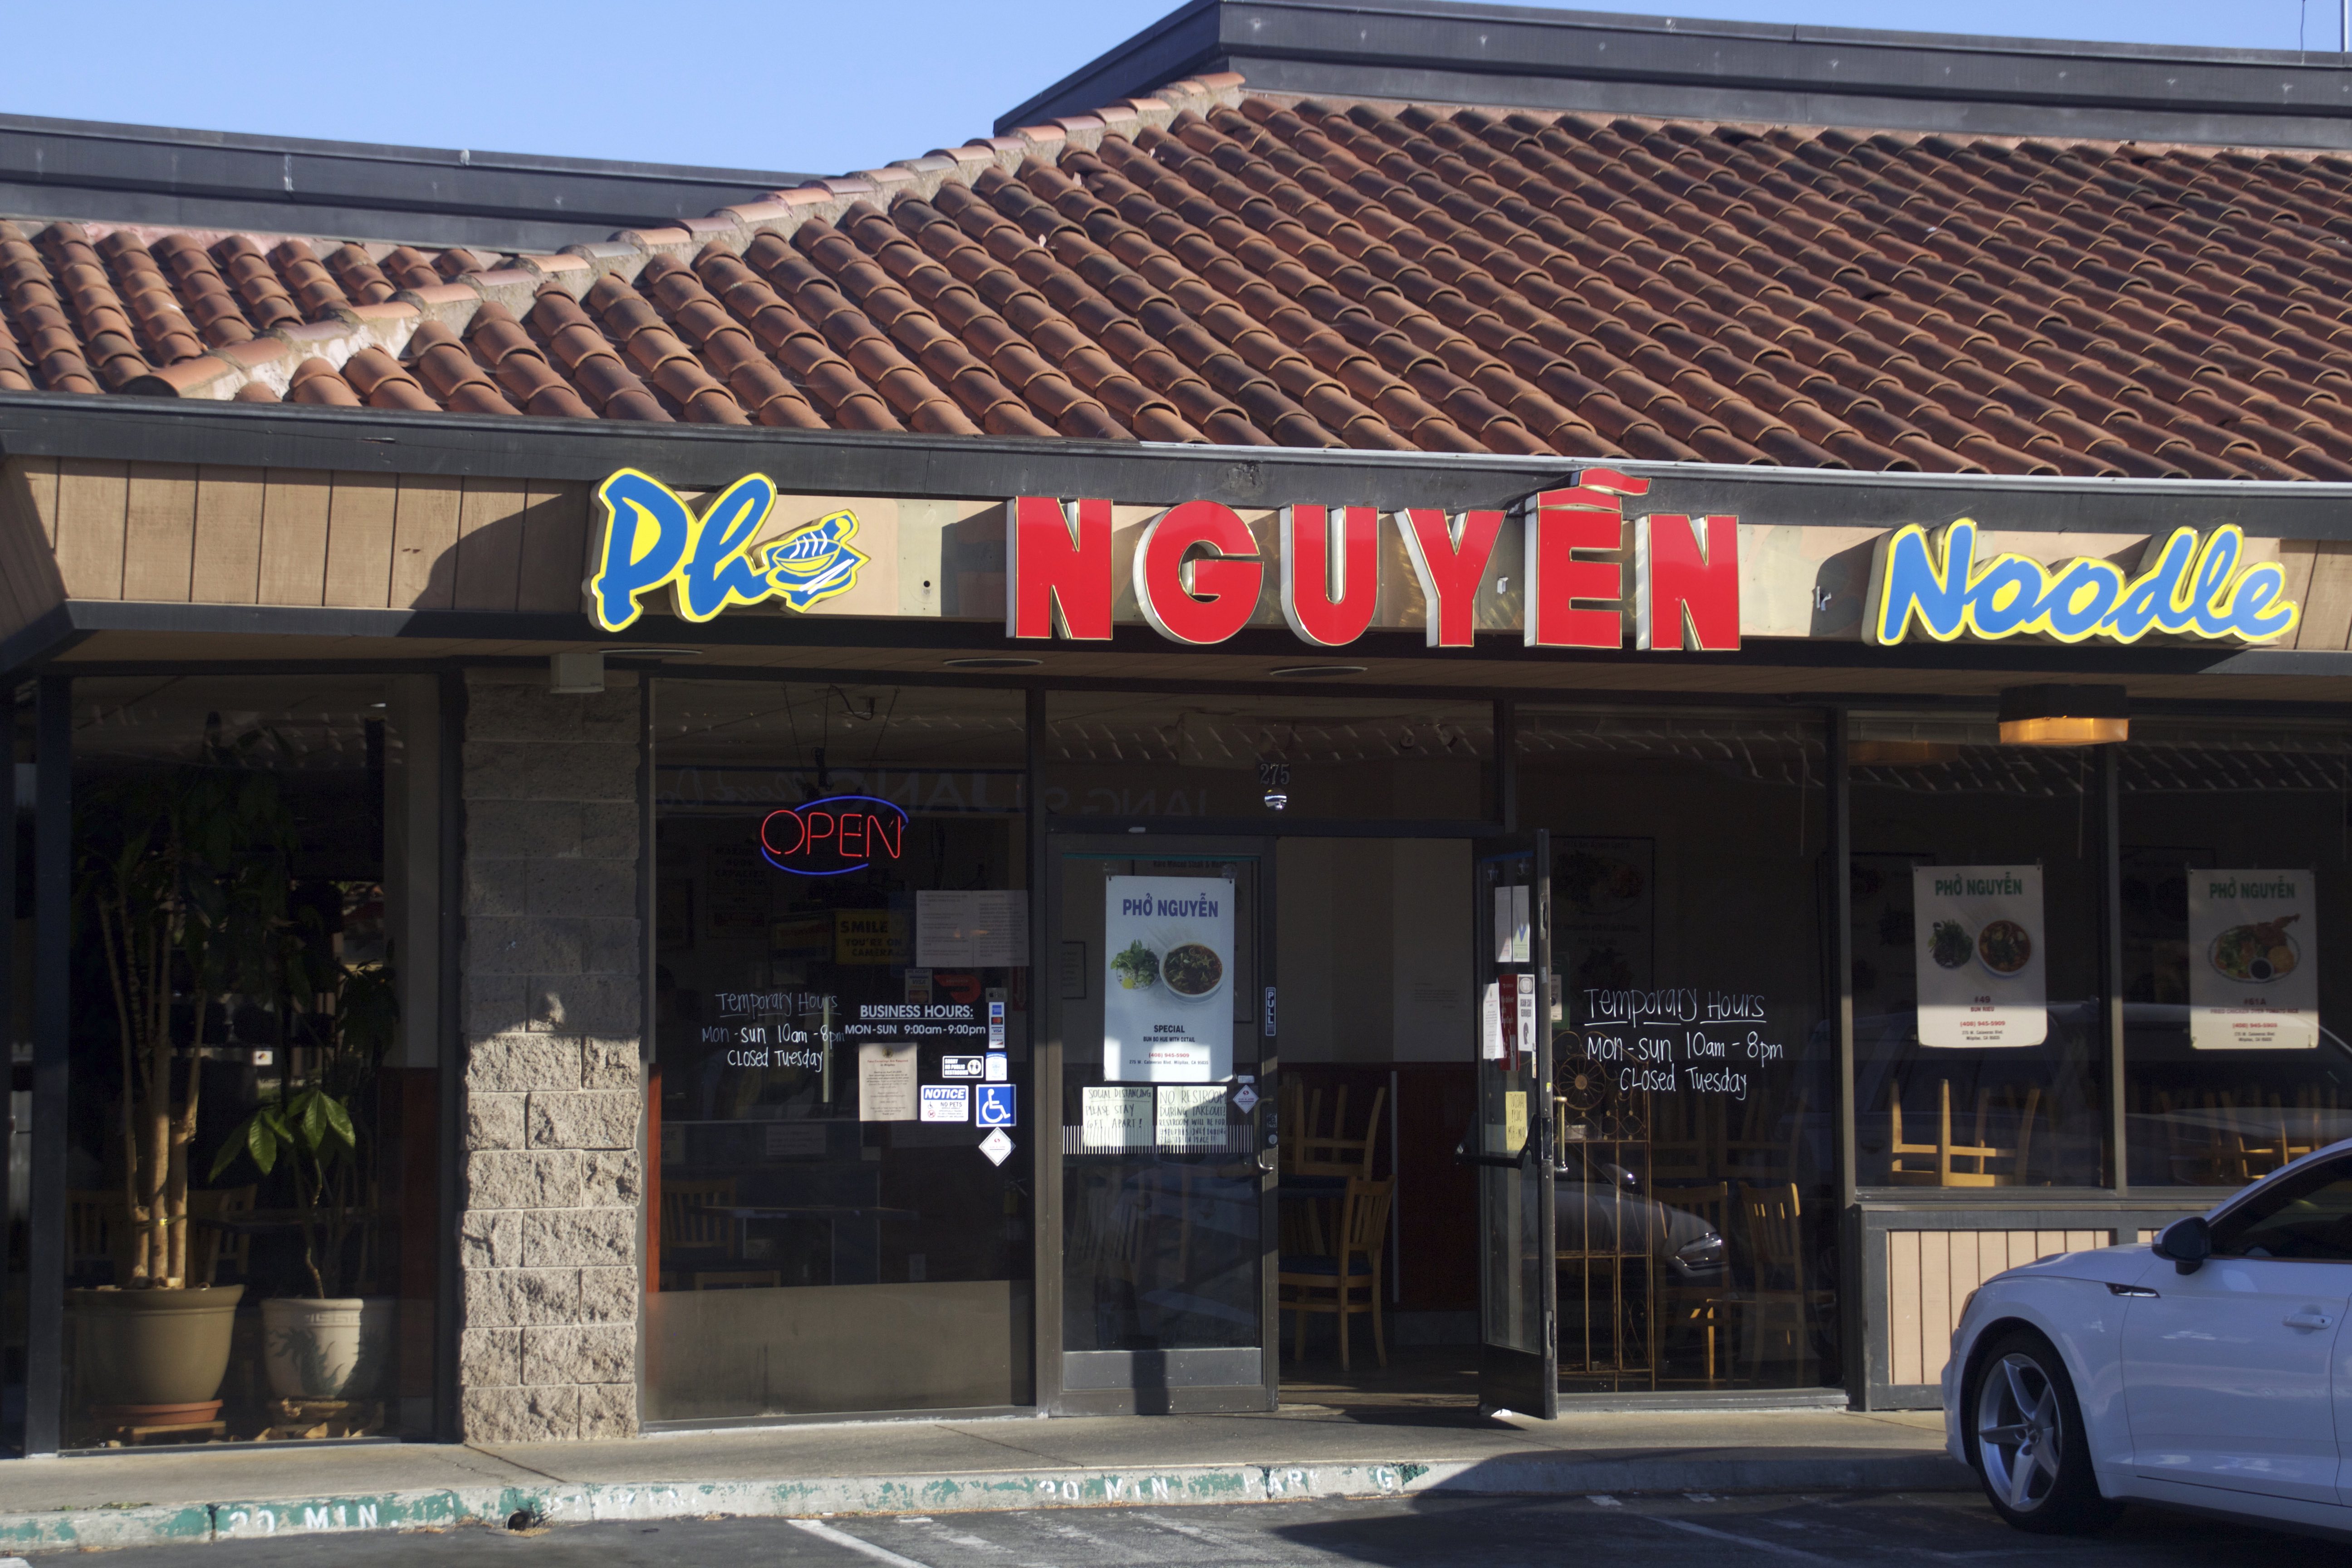 Pho Nguyen’s storefront in Milpitas